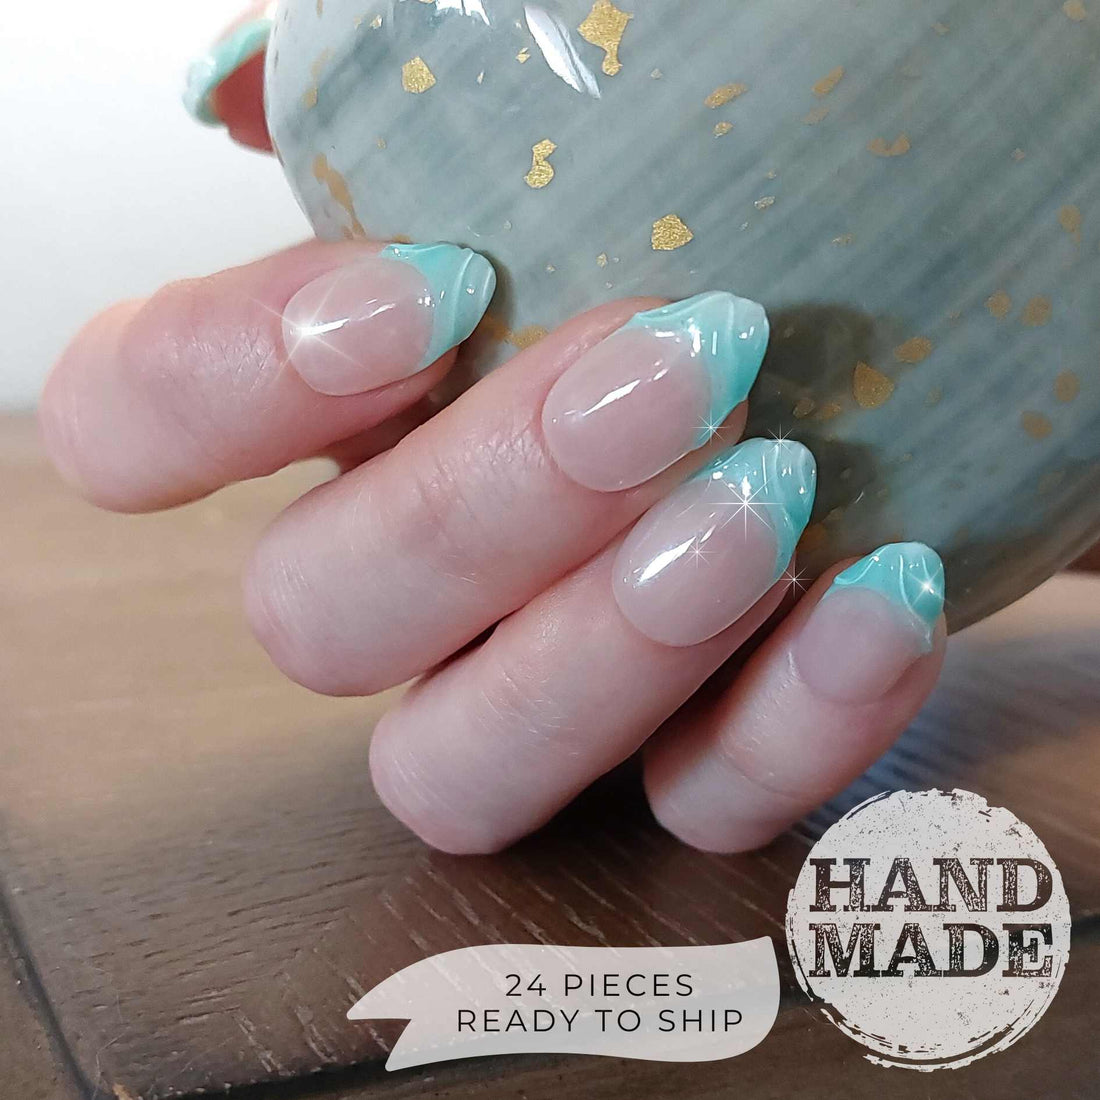 Cyan french tips with 3d swirls, bright mint blue french tip press on nails. Handmade reusable press on nails from FancyB Nails show in short almond.